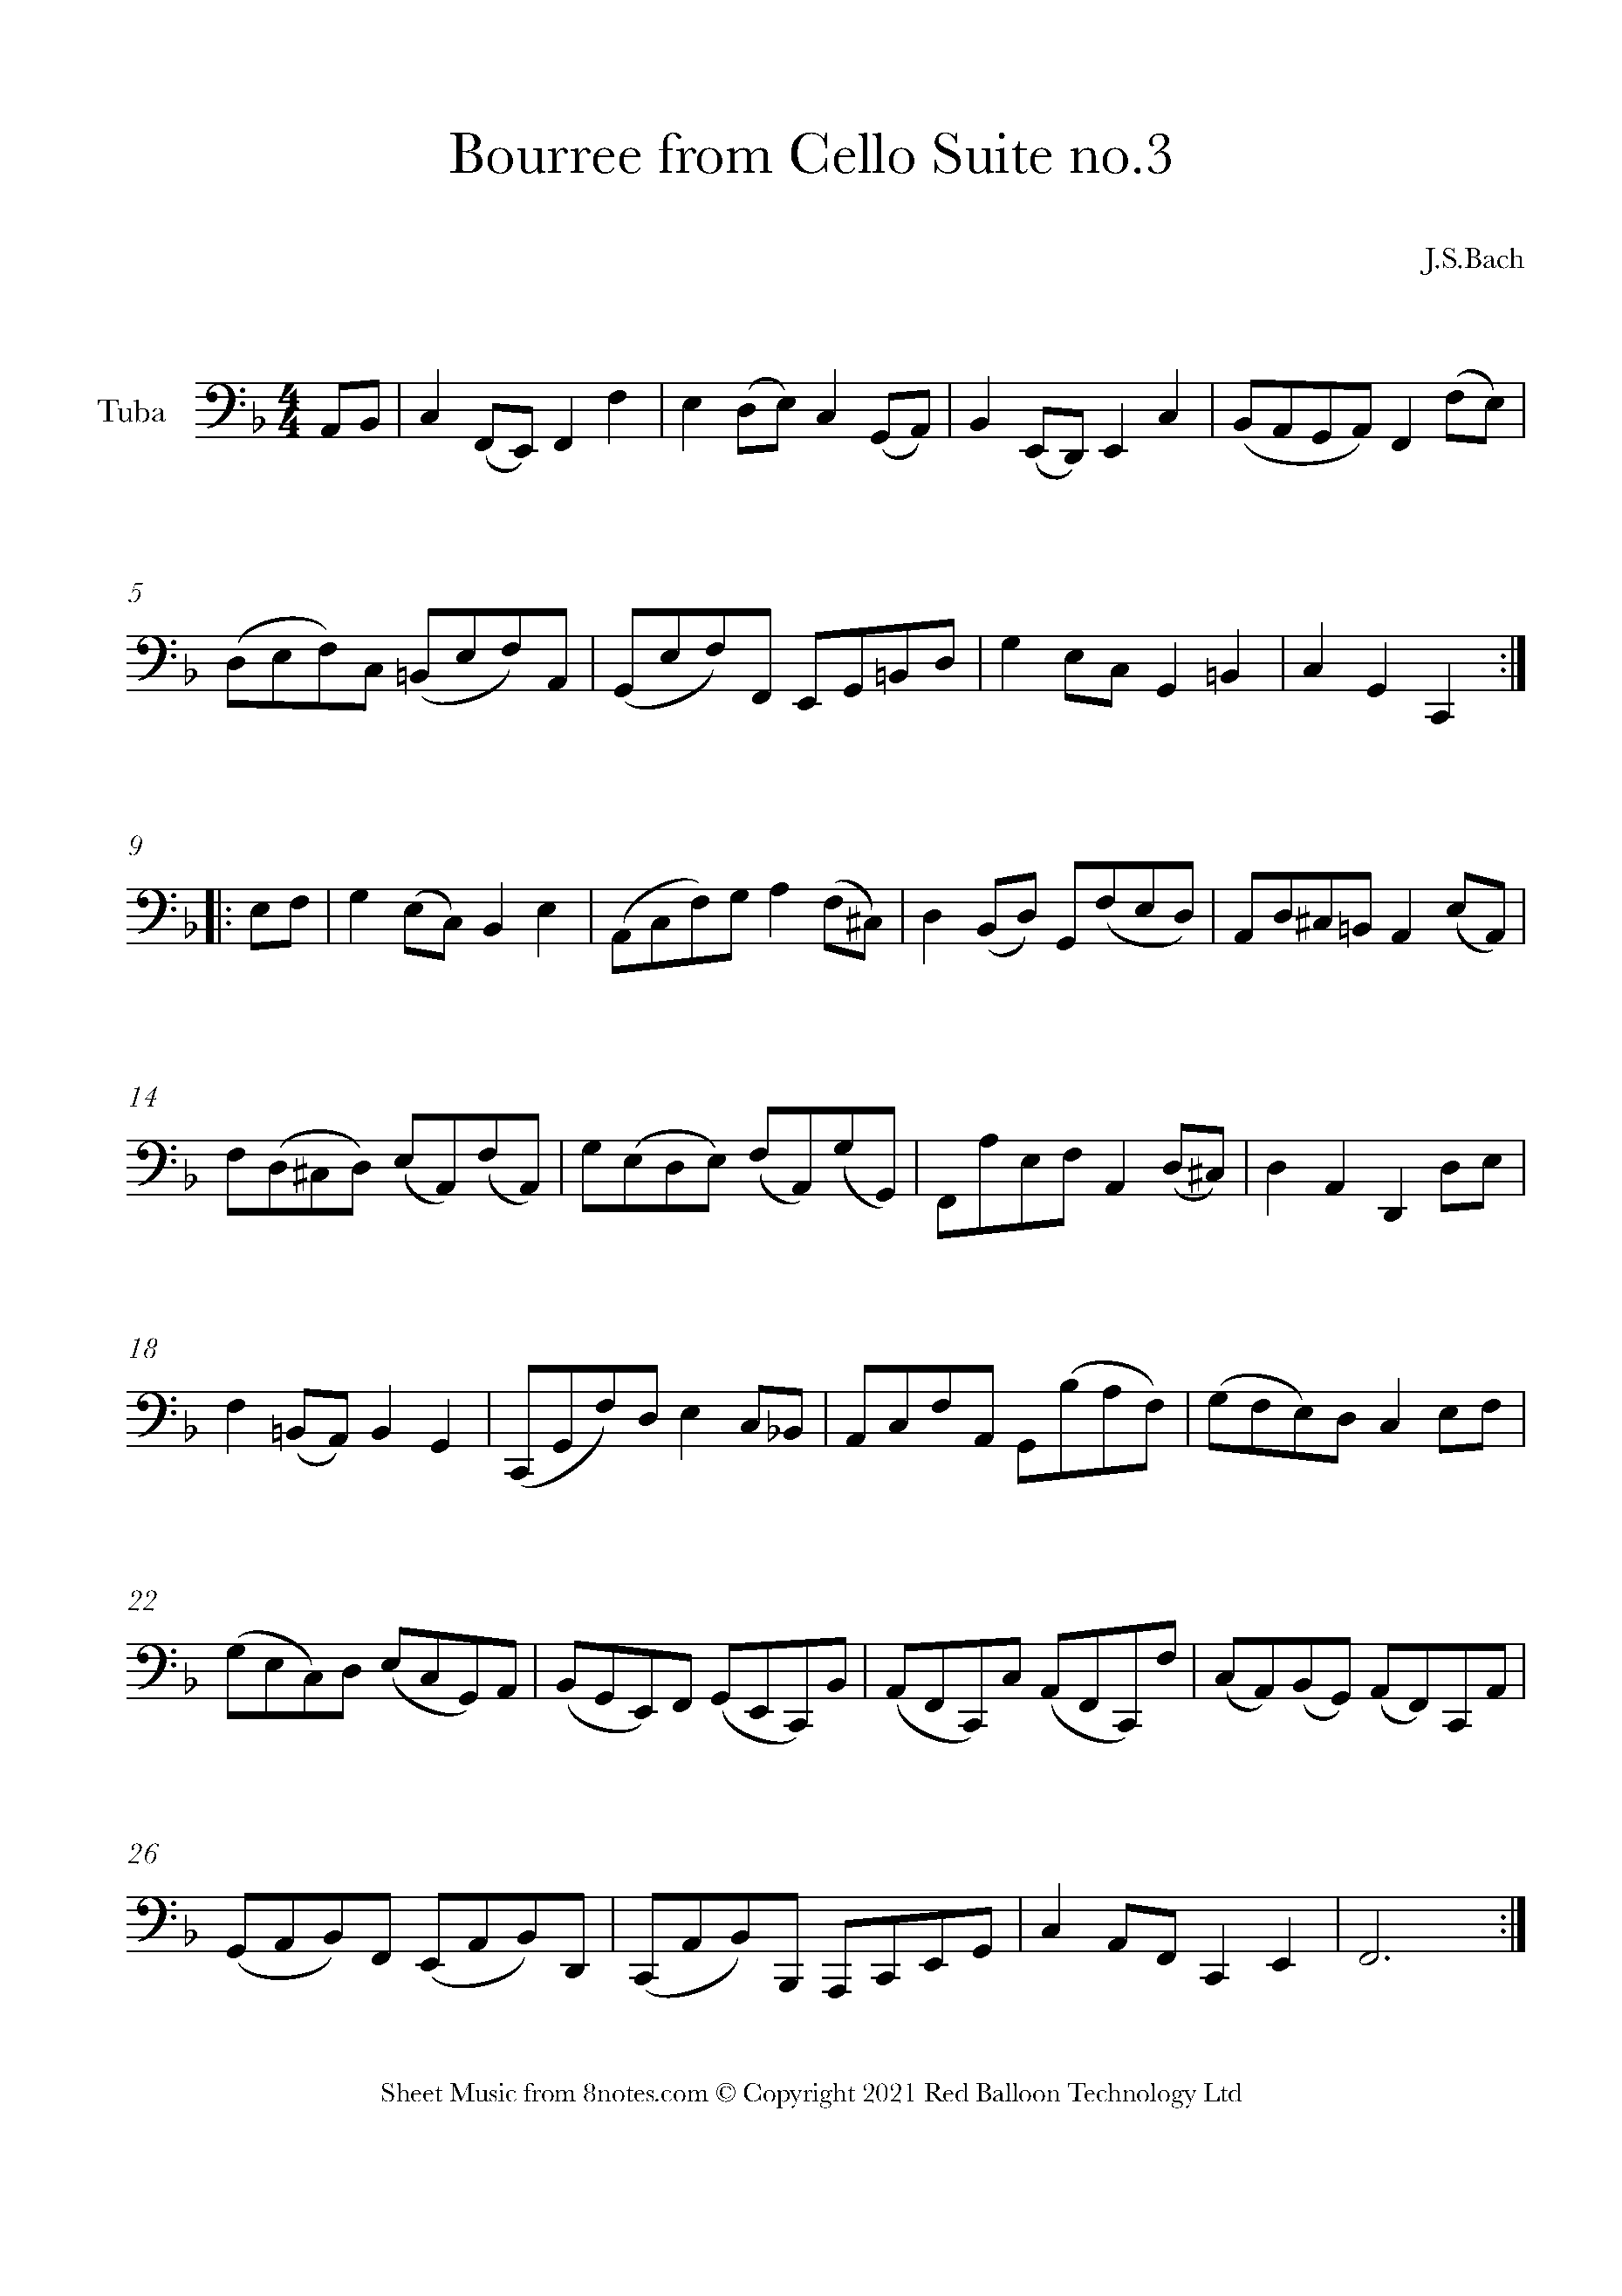 Email monster adventure Bach - Bourree from Cello Suite no.3 Sheet music for Tuba - 8notes.com